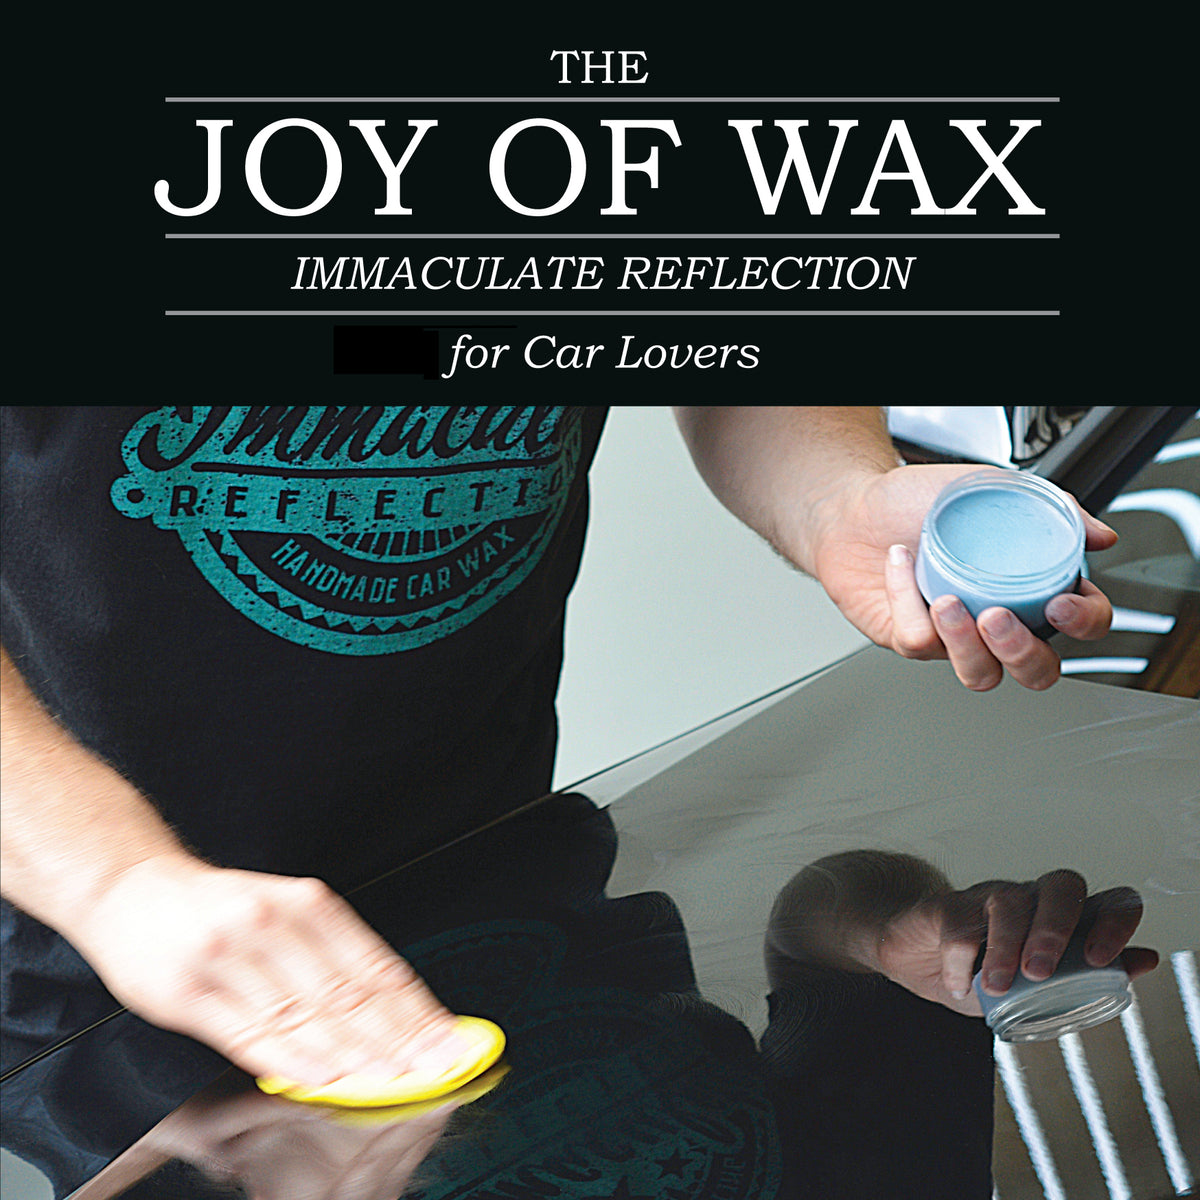 Immaculate Reflection Joy of wax, for car lovers. Applying hand made blue bubblegum car wax to car bonnet by hand with a yellow sponge wax applicator.